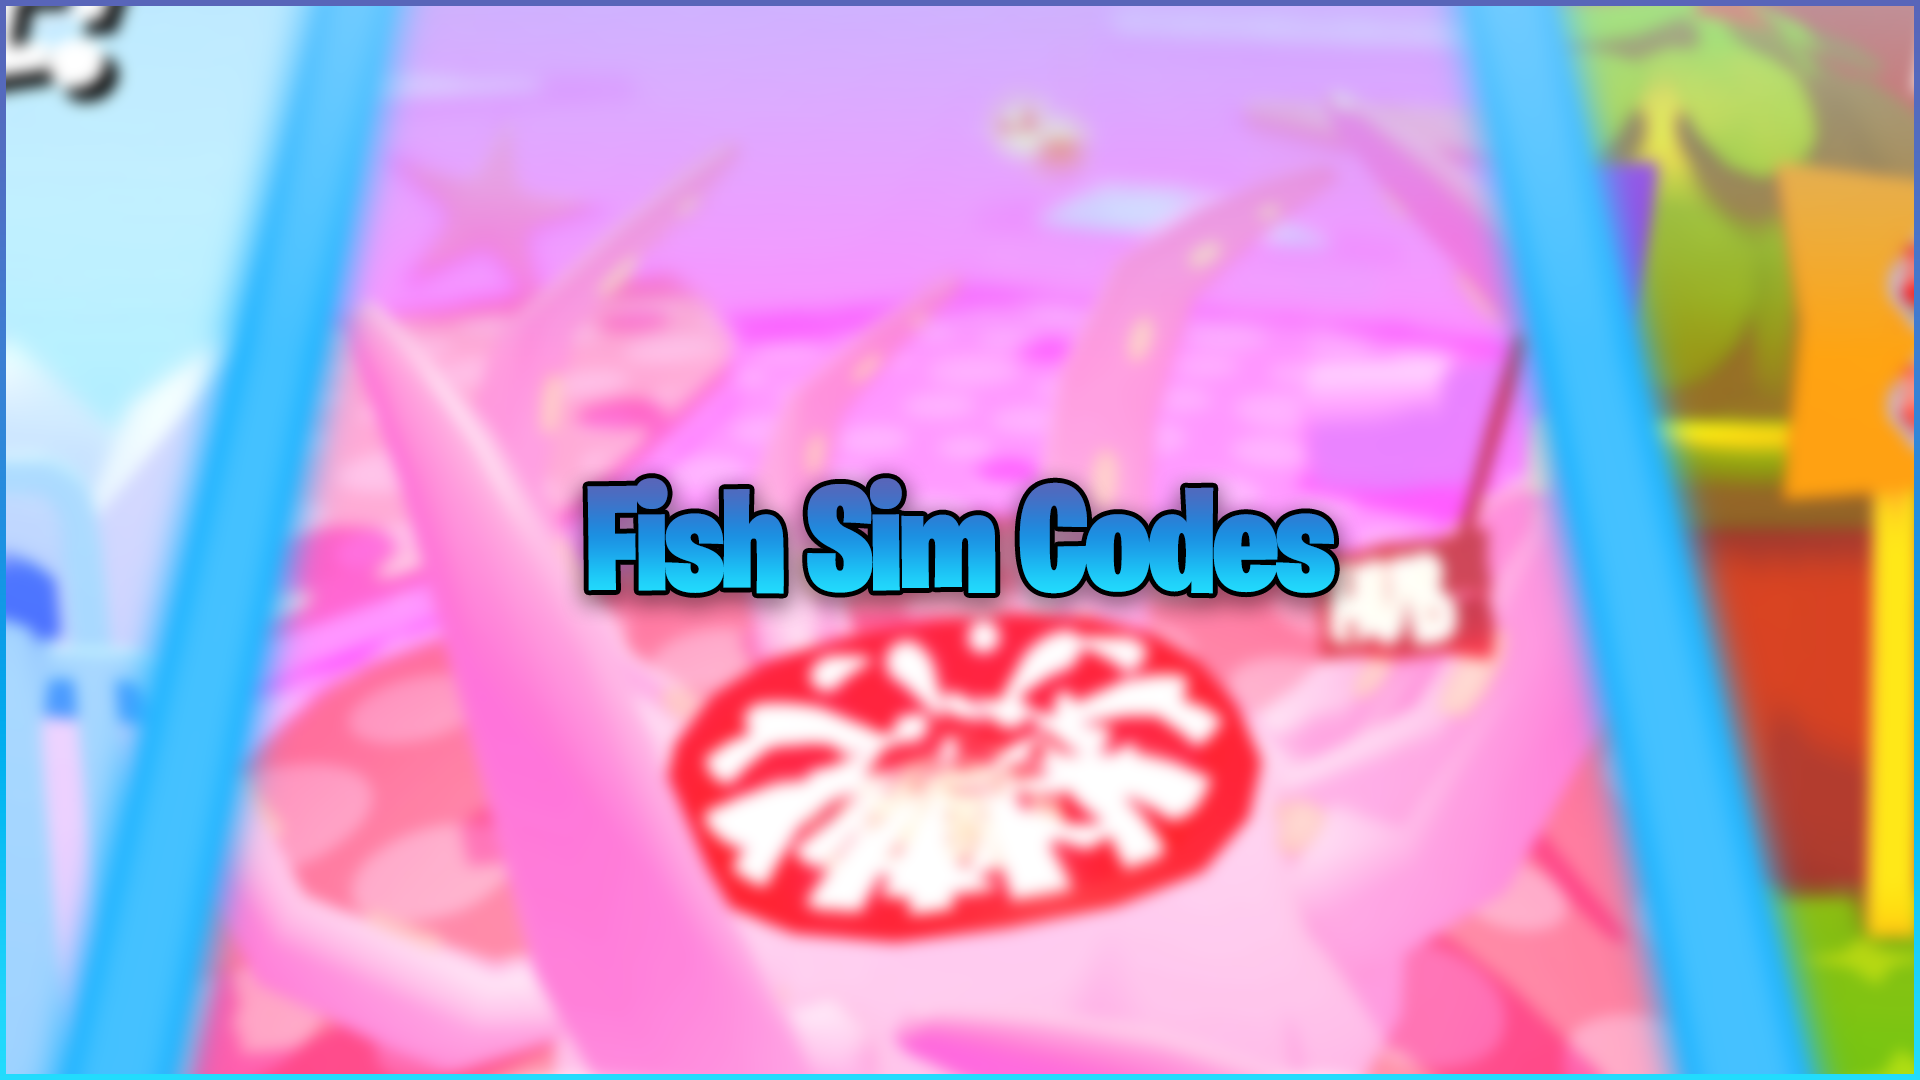 Roblox Fish Simulator codes (August 2023): Free Pearls and Coins